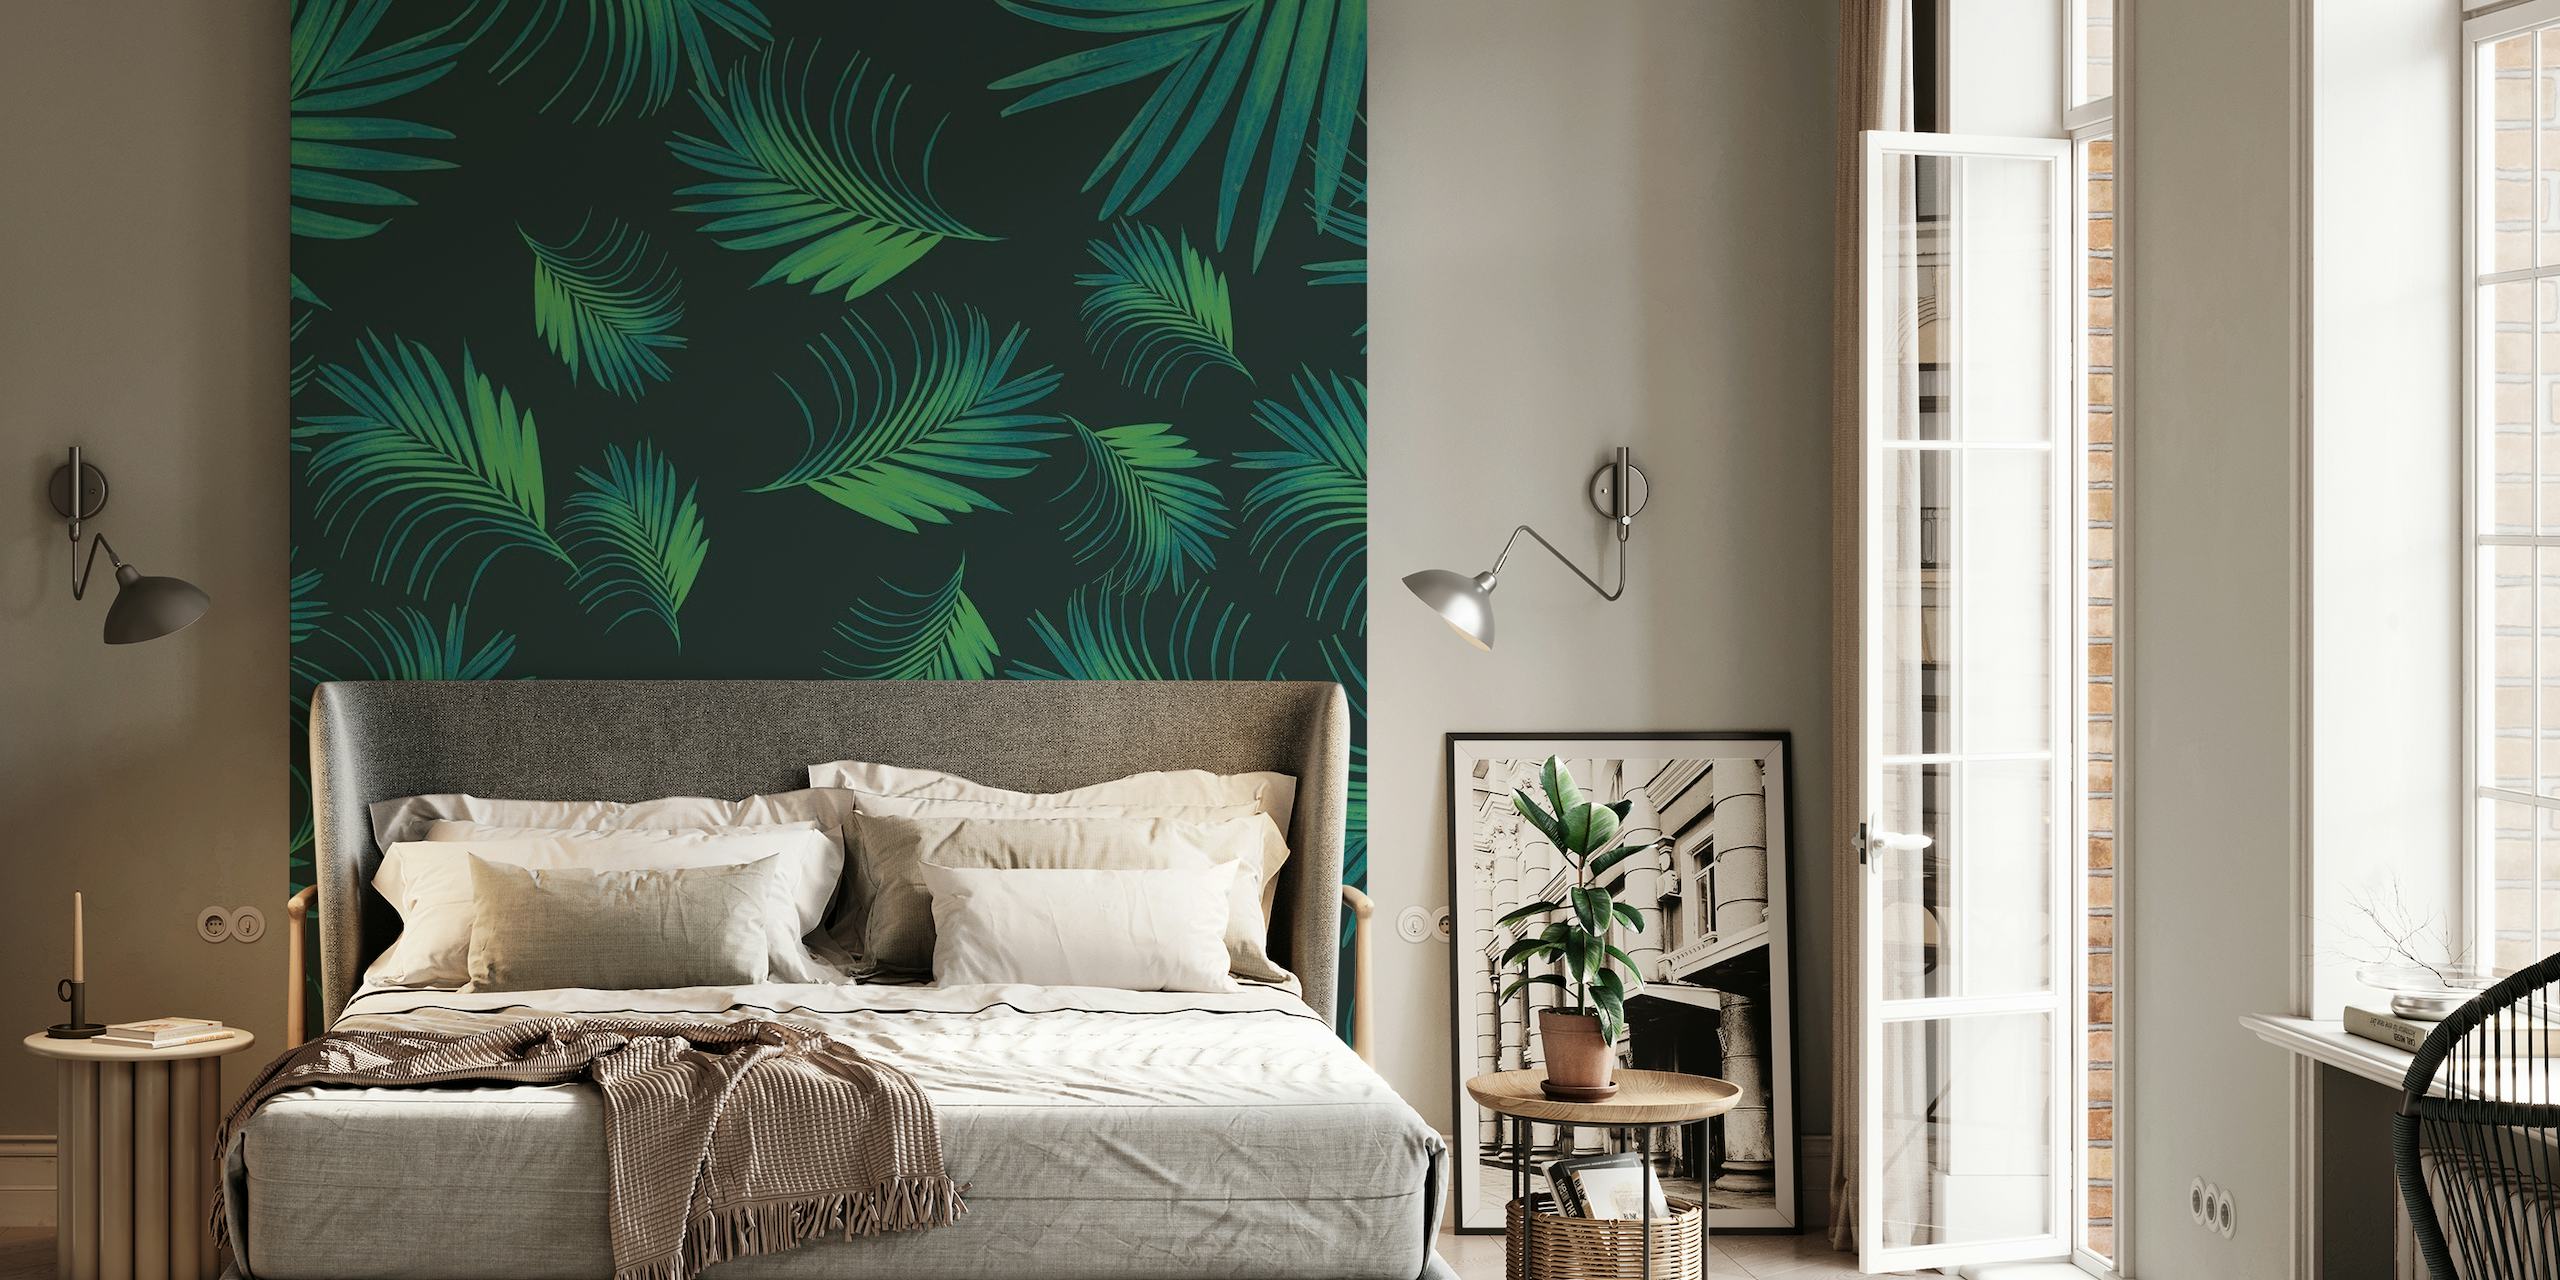 Tropical Night Palms Pattern Wall Mural with verdant fronds on a dark background